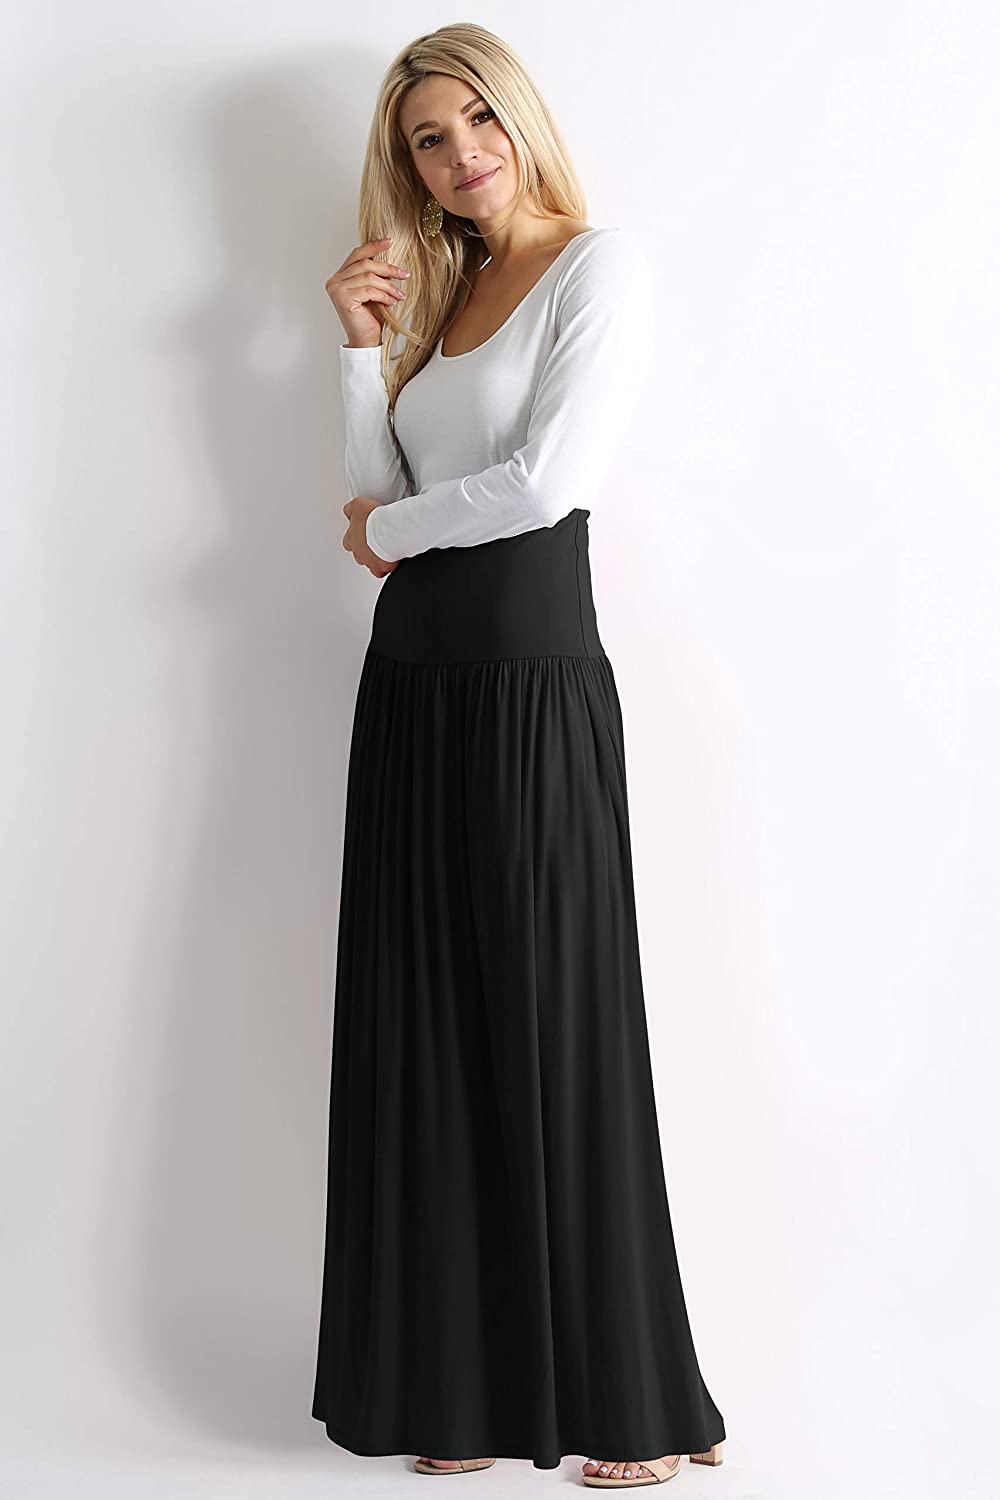 Reg And Plus Size Maxi Skirts For Women Long Length Skirts With Pockets